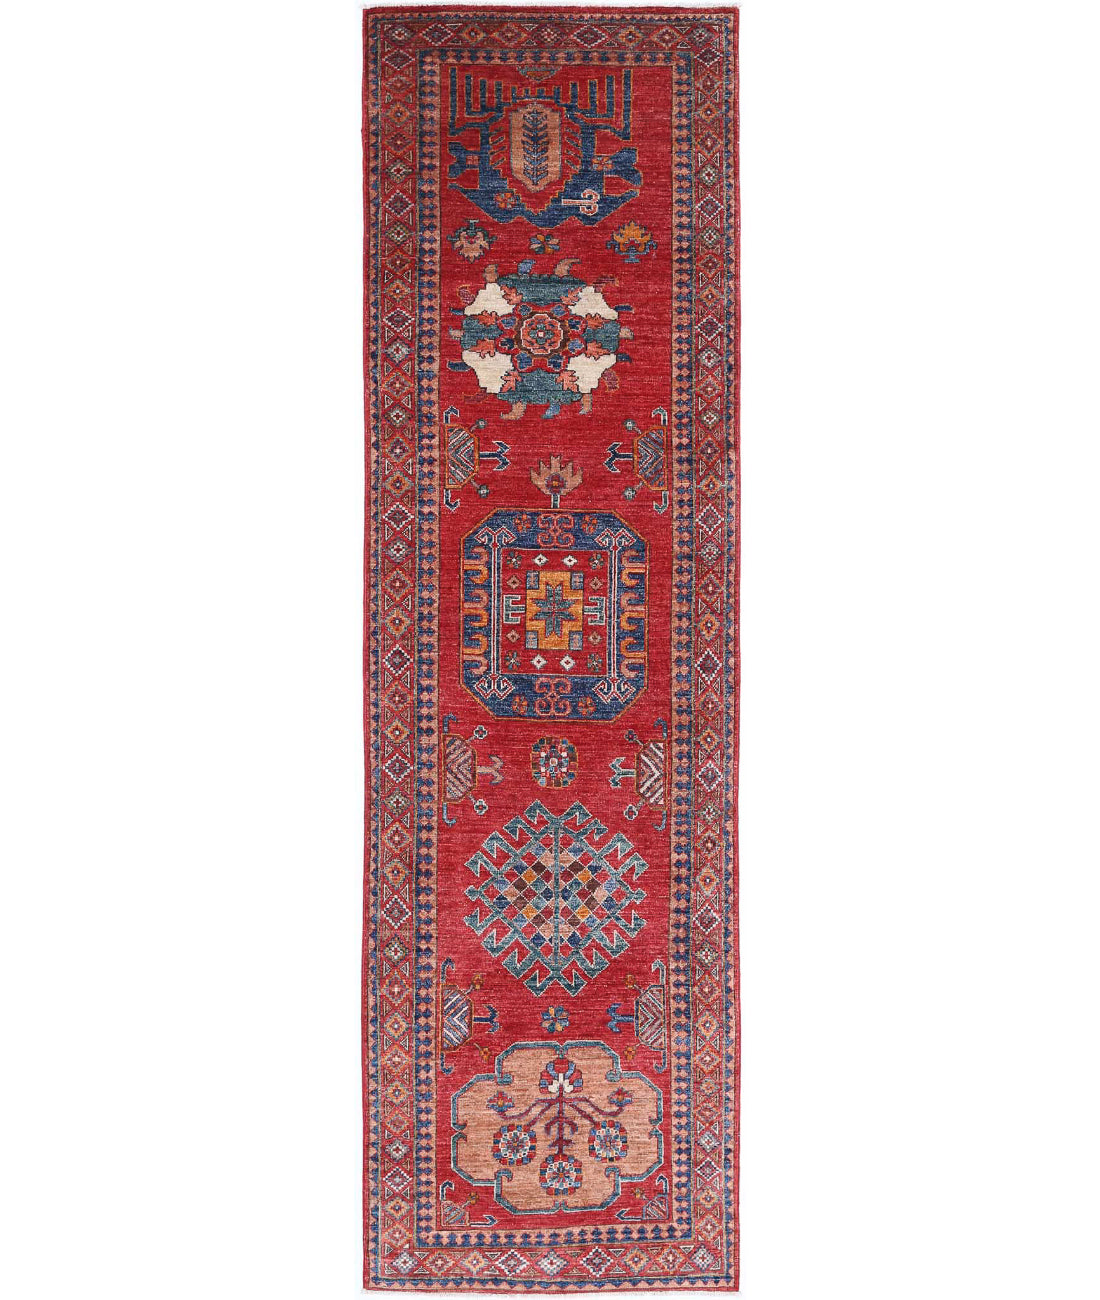 Hand Knotted Nomadic Caucasian Humna Wool Rug - 2&#39;8&#39;&#39; x 9&#39;11&#39;&#39; 2&#39;8&#39;&#39; x 9&#39;11&#39;&#39; (80 X 298) / Red / Taupe